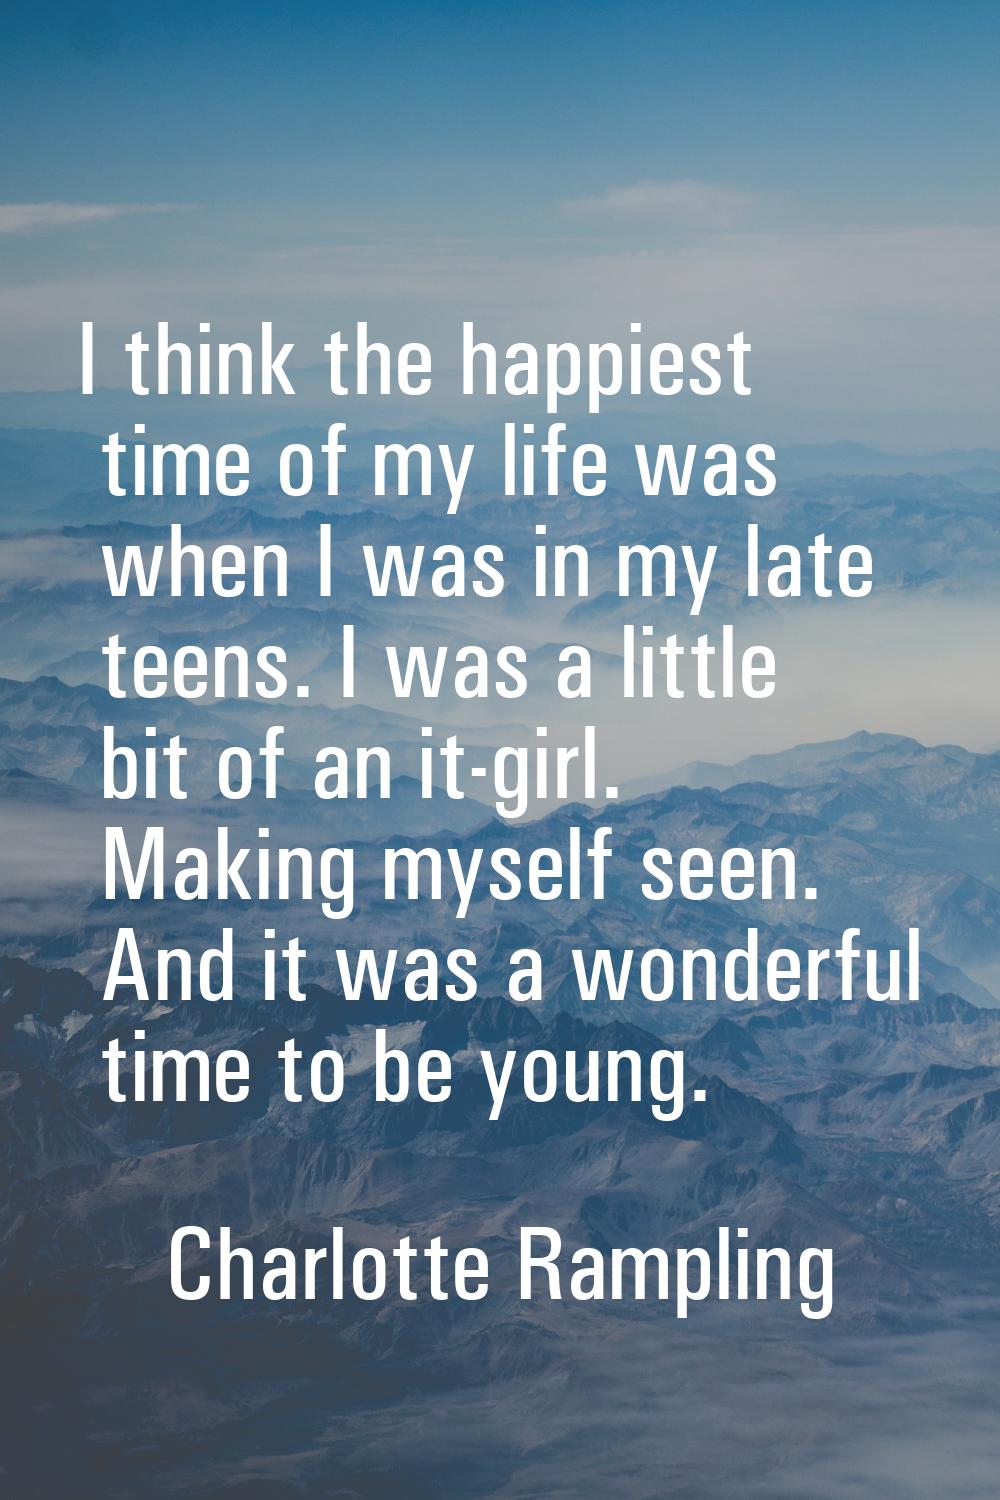 I think the happiest time of my life was when I was in my late teens. I was a little bit of an it-g